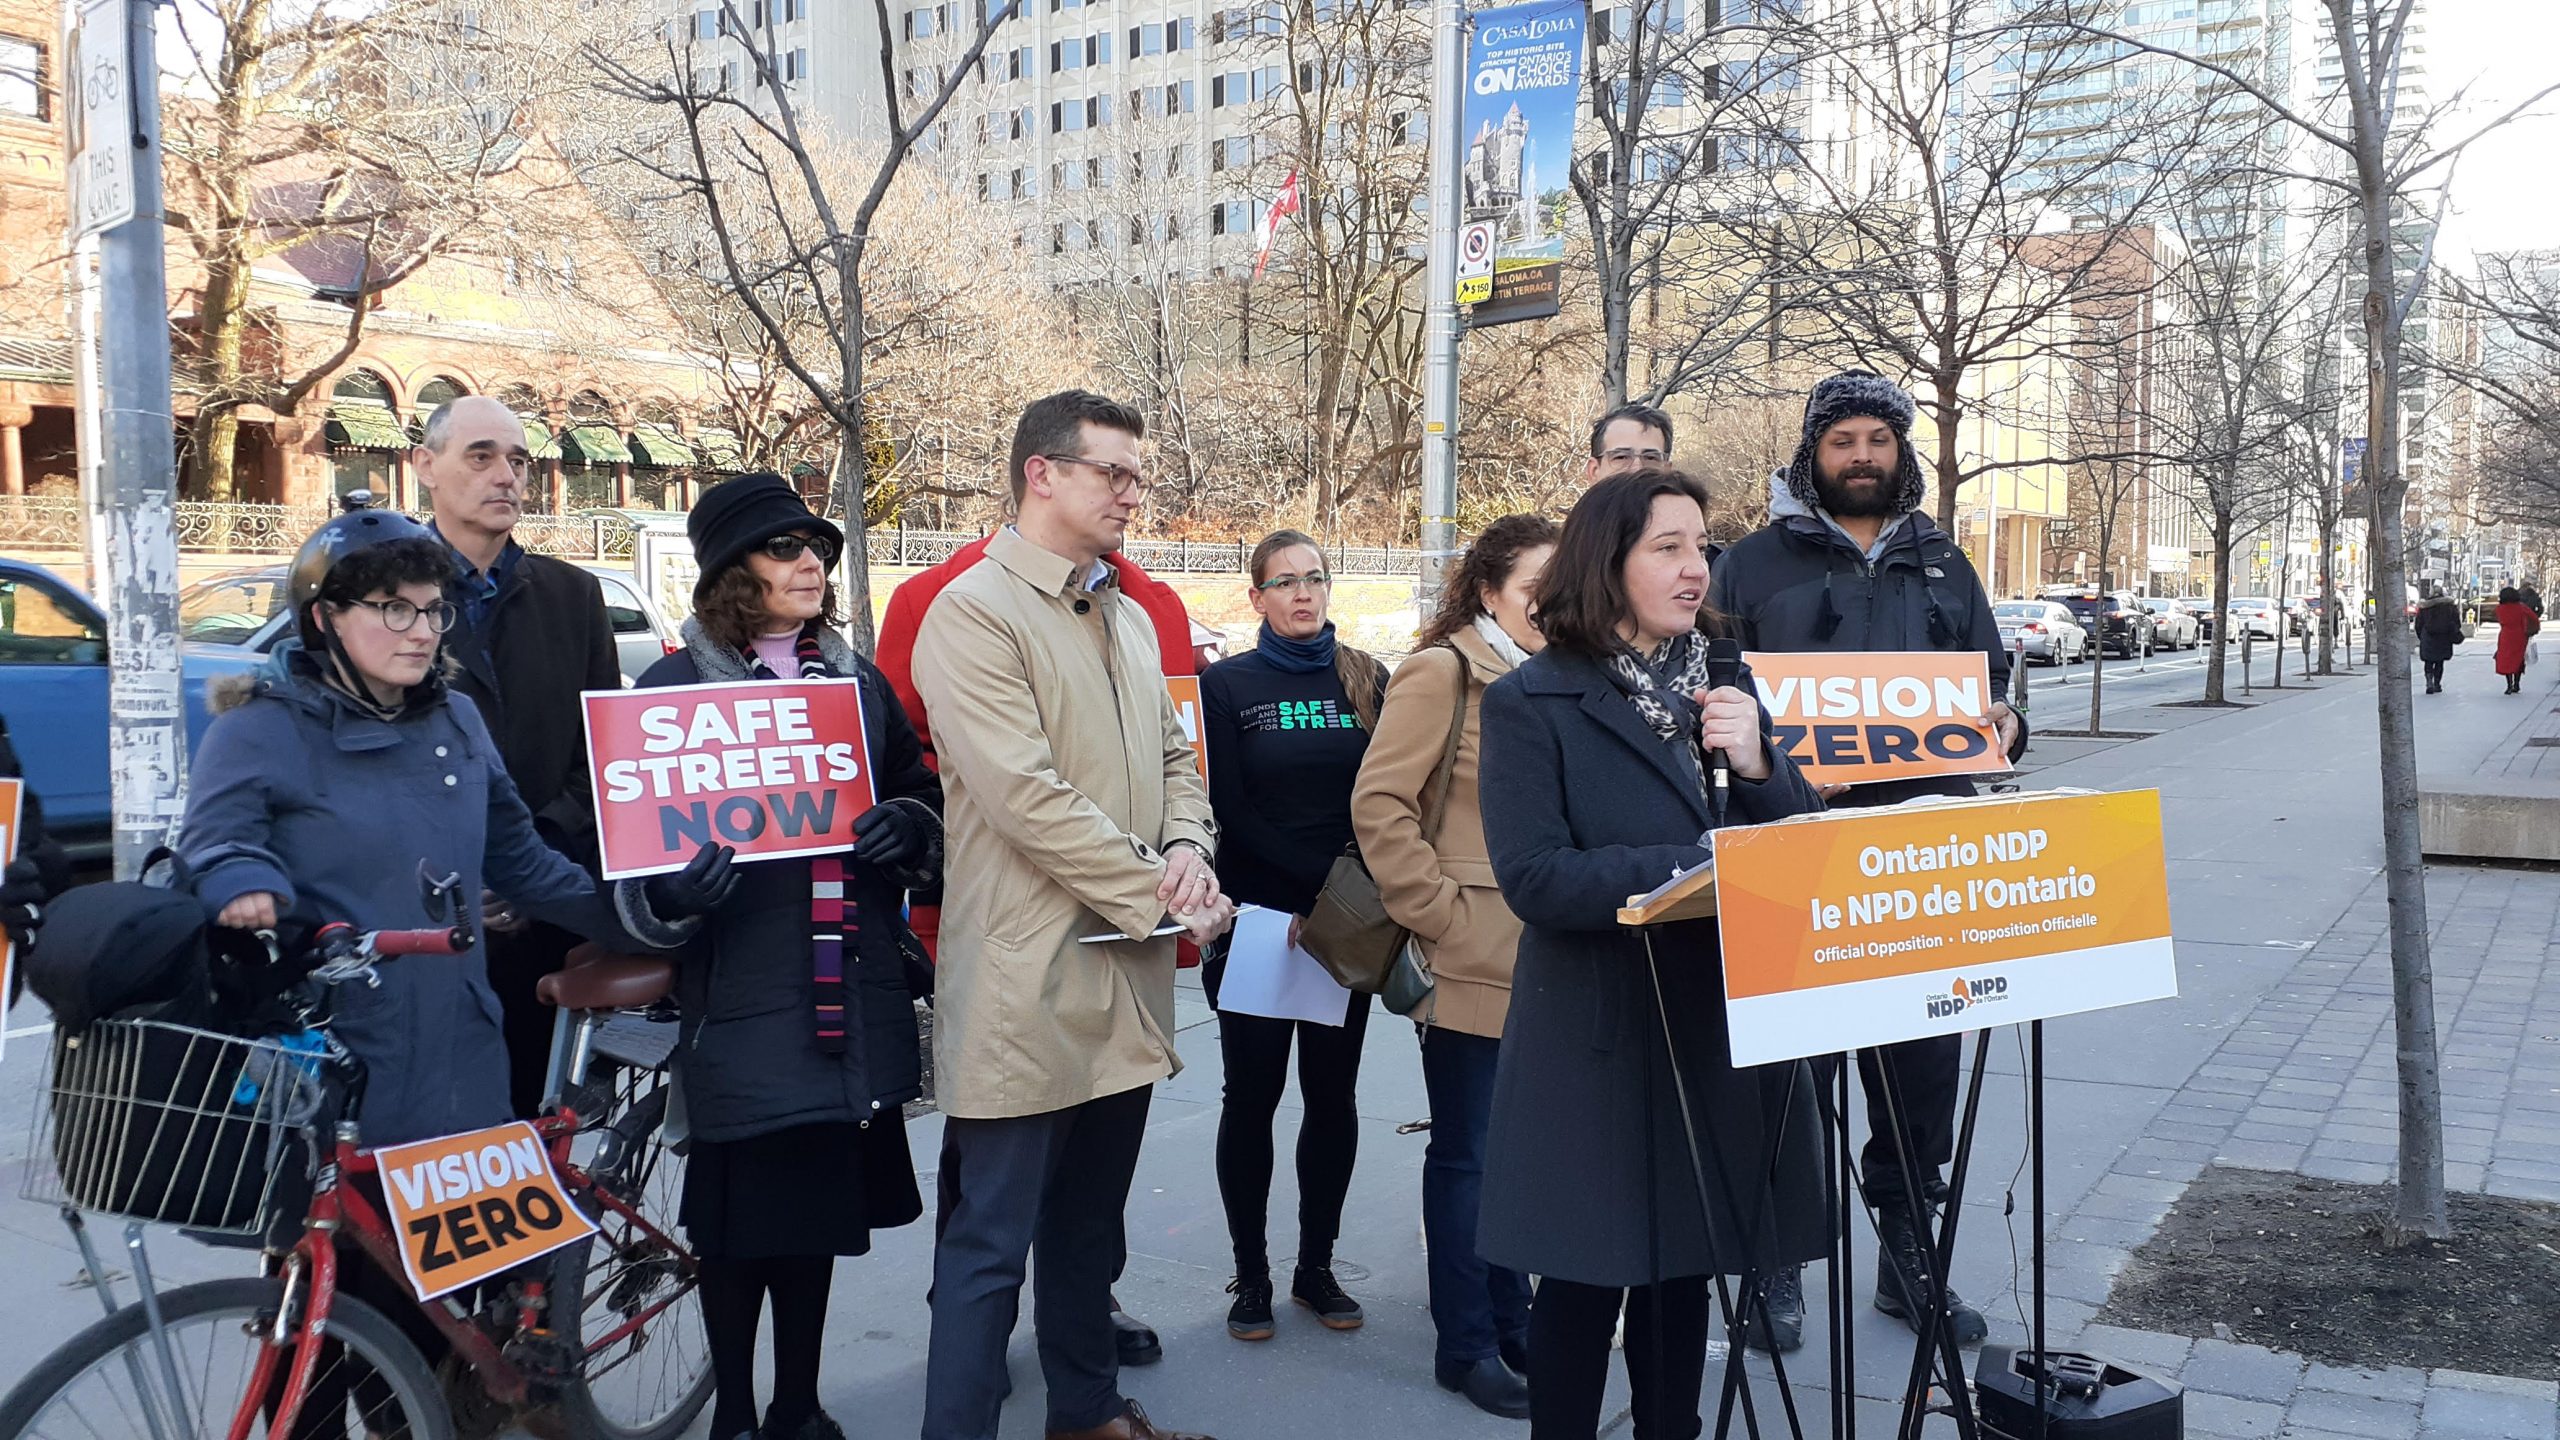 NDP renews call for province-wide Vision Zero plan to combat road deaths and injuries